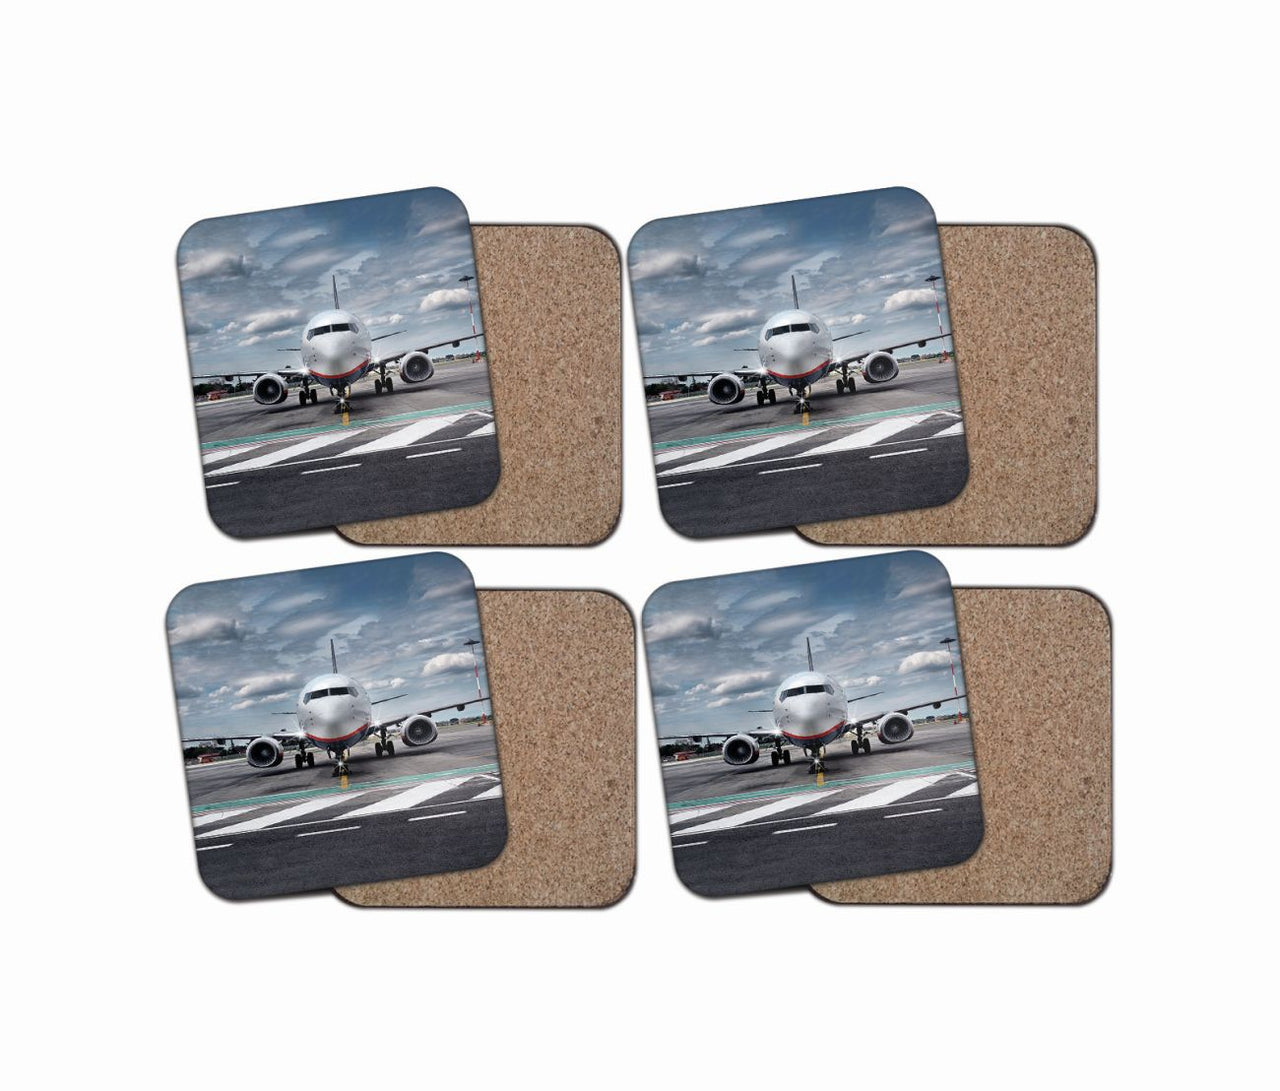 Amazing Clouds and Boeing 737 NG Designed Coasters